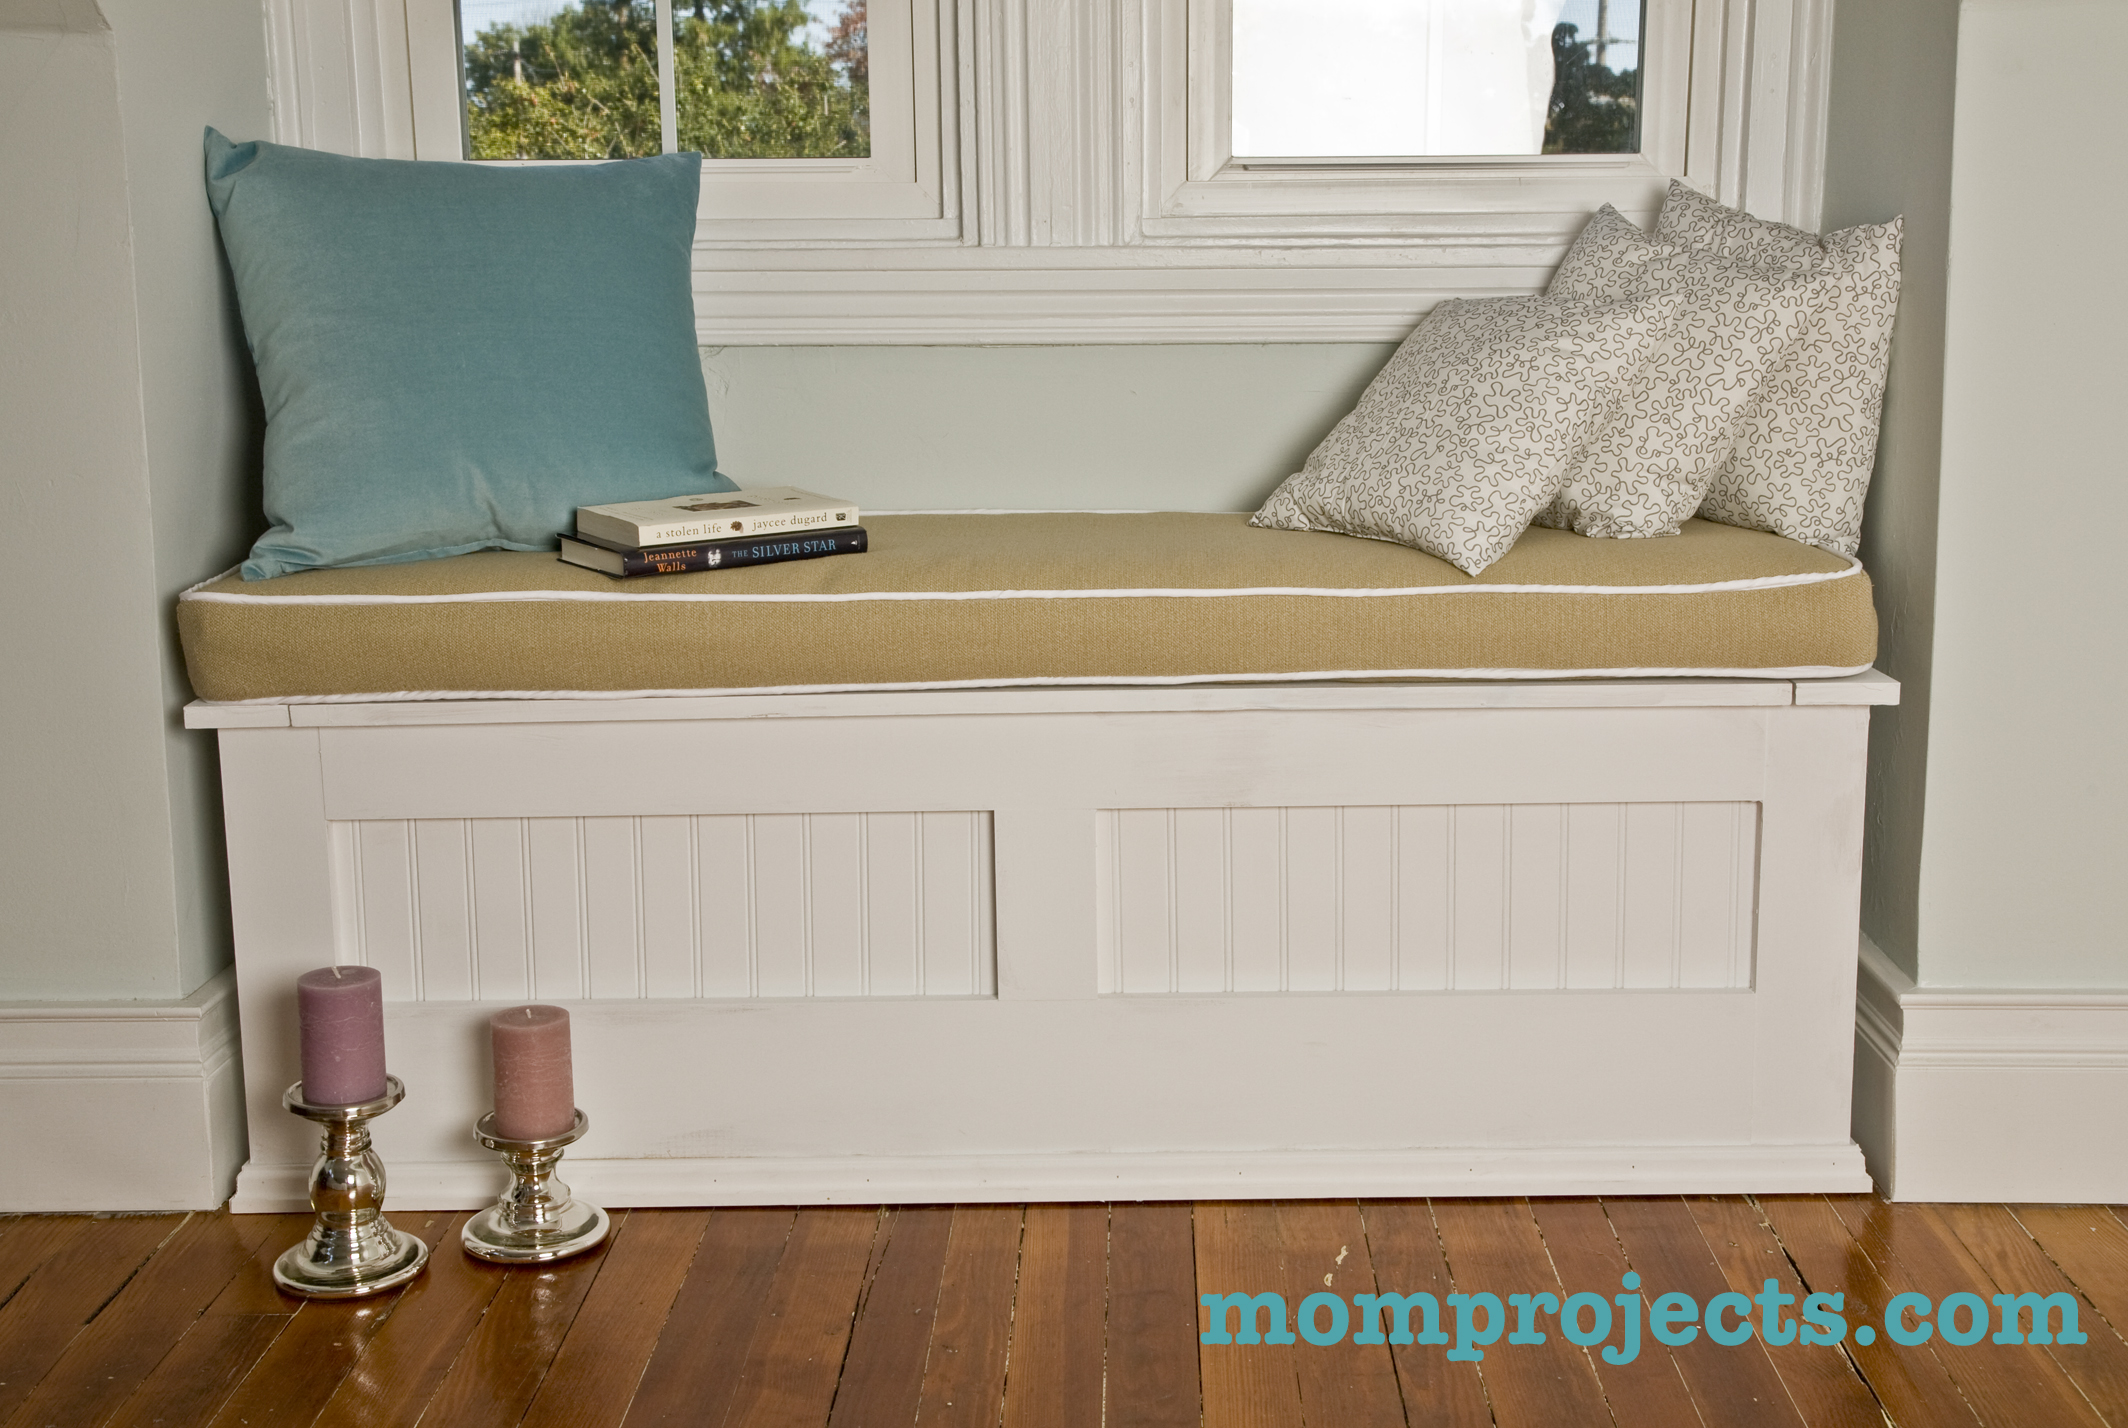 How To Make A Window Seat Cushion With Piping